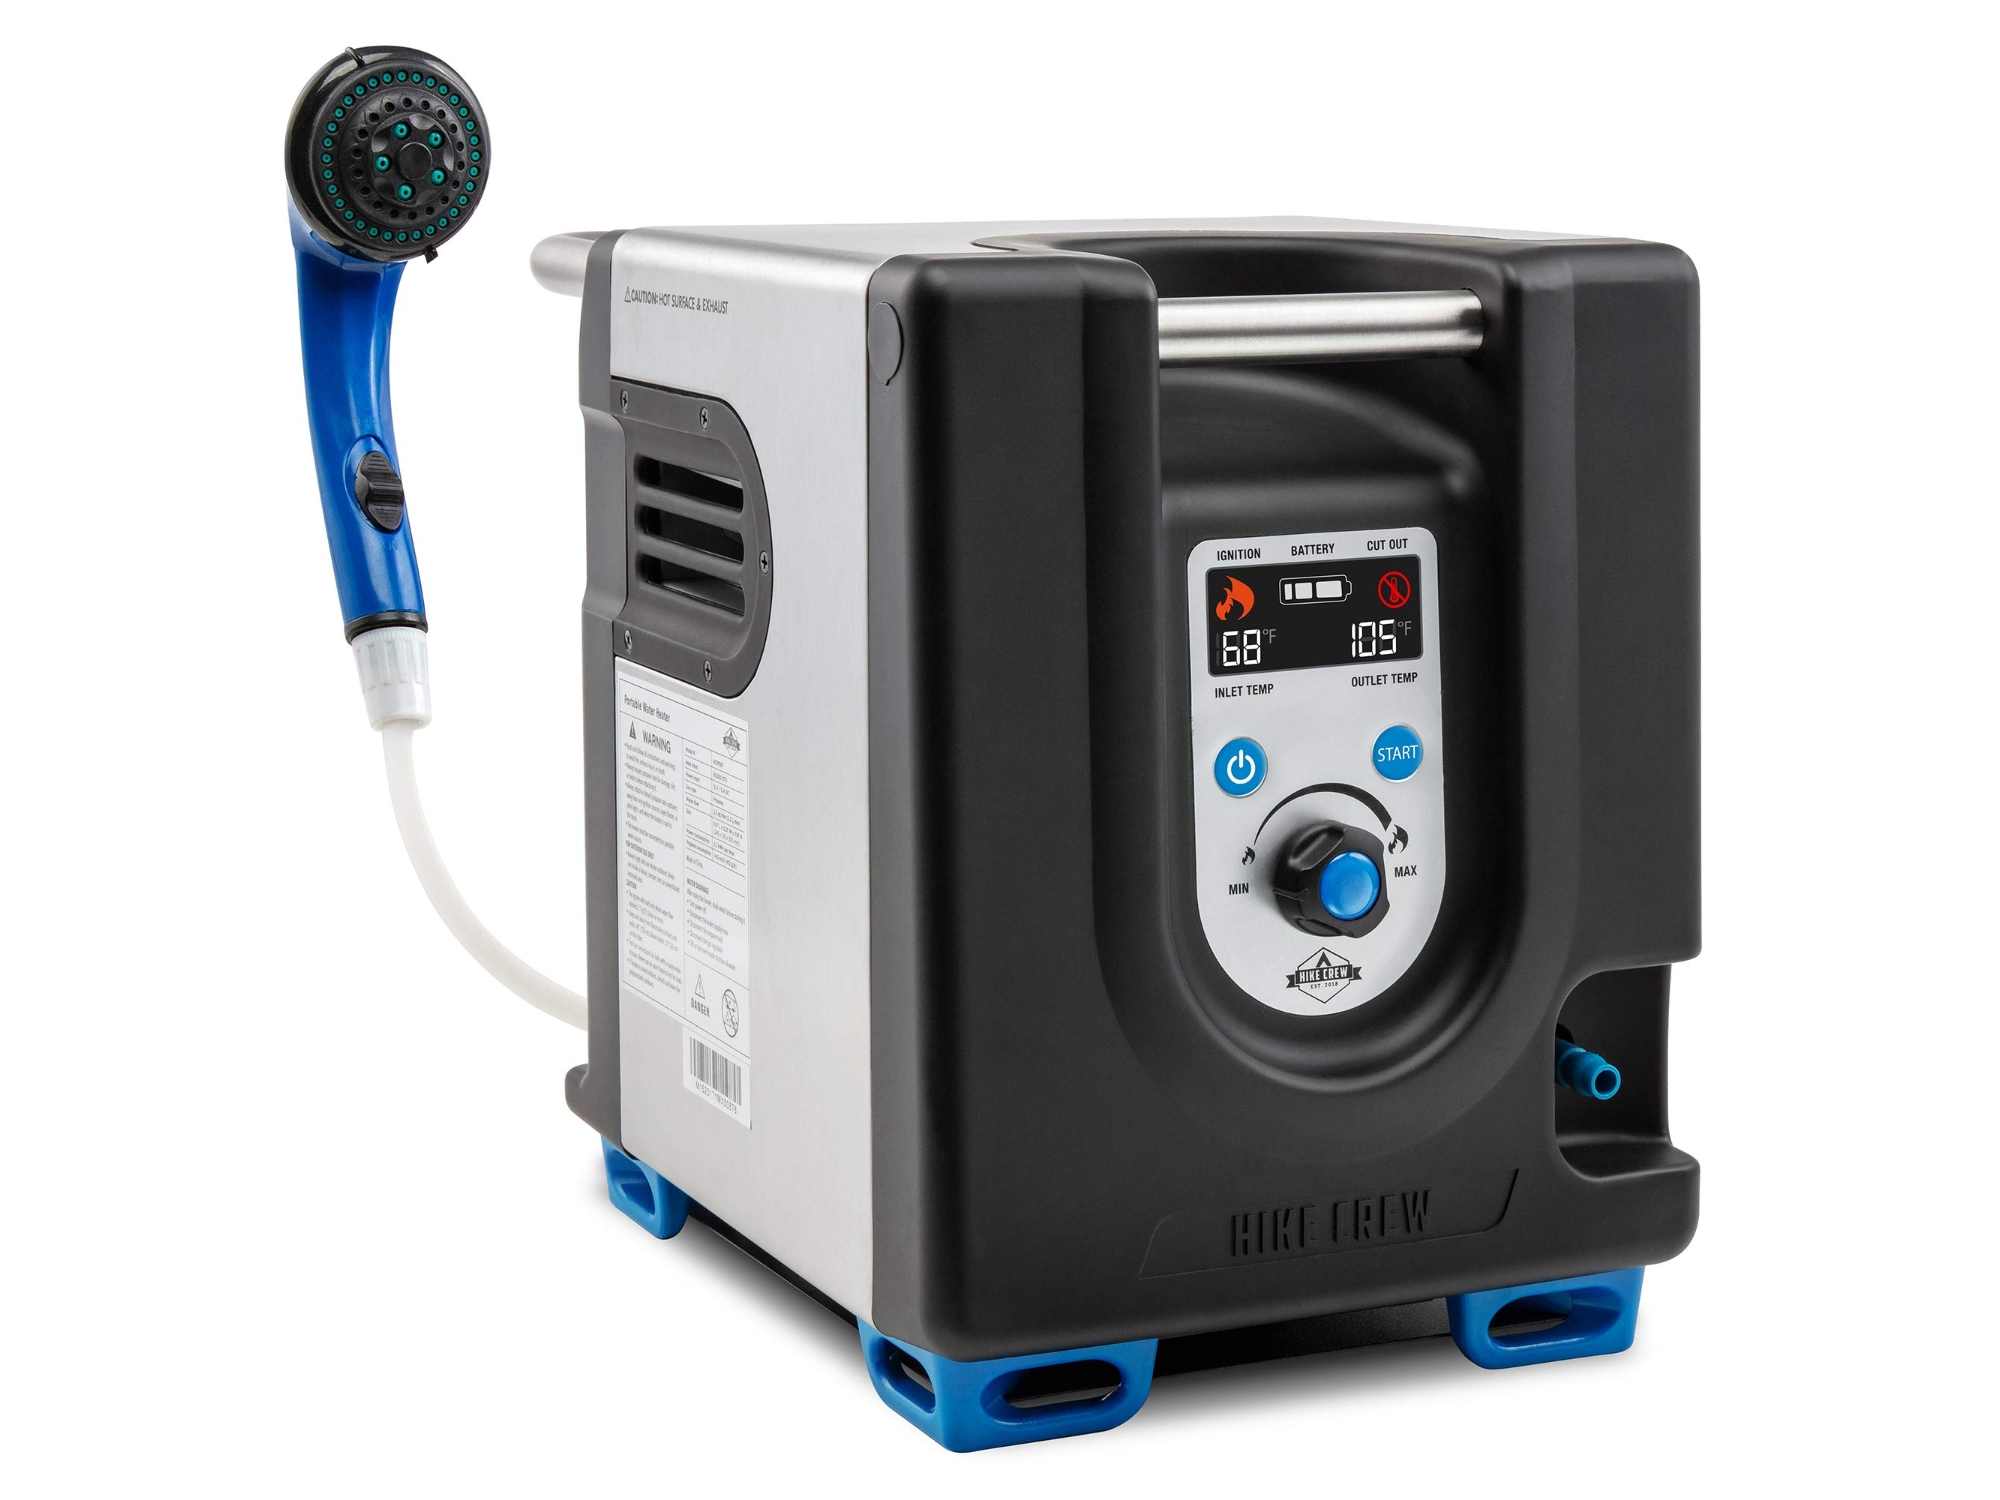 Hike Crew Portable Propane Water Heater & Shower Pump Built-in Battery